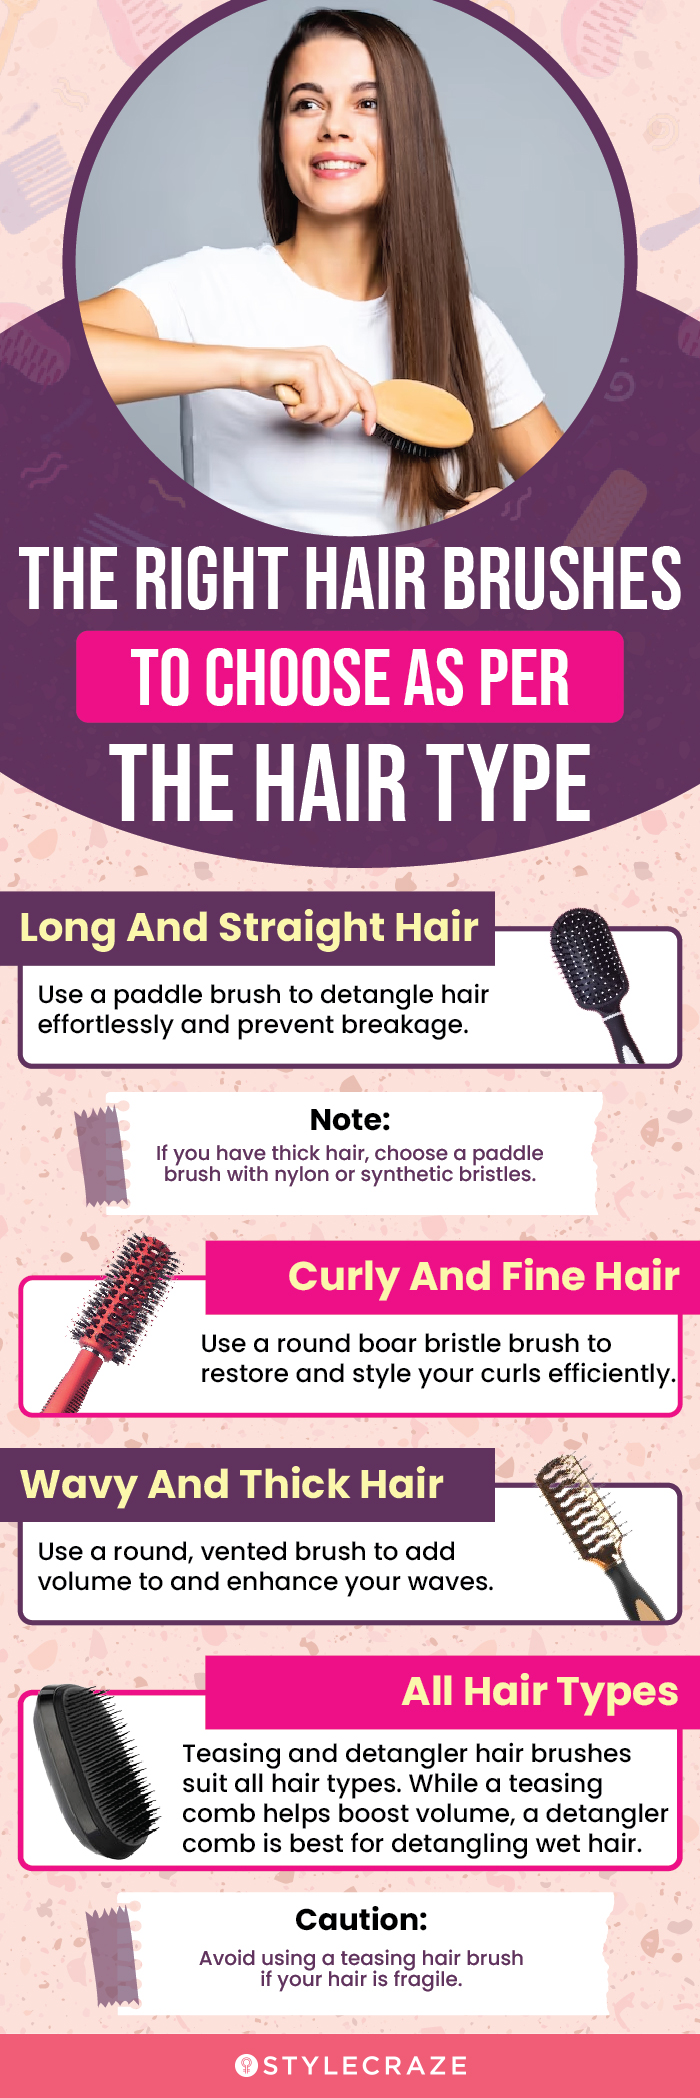 the right hair brushes to choose as per the hair type (infographic)